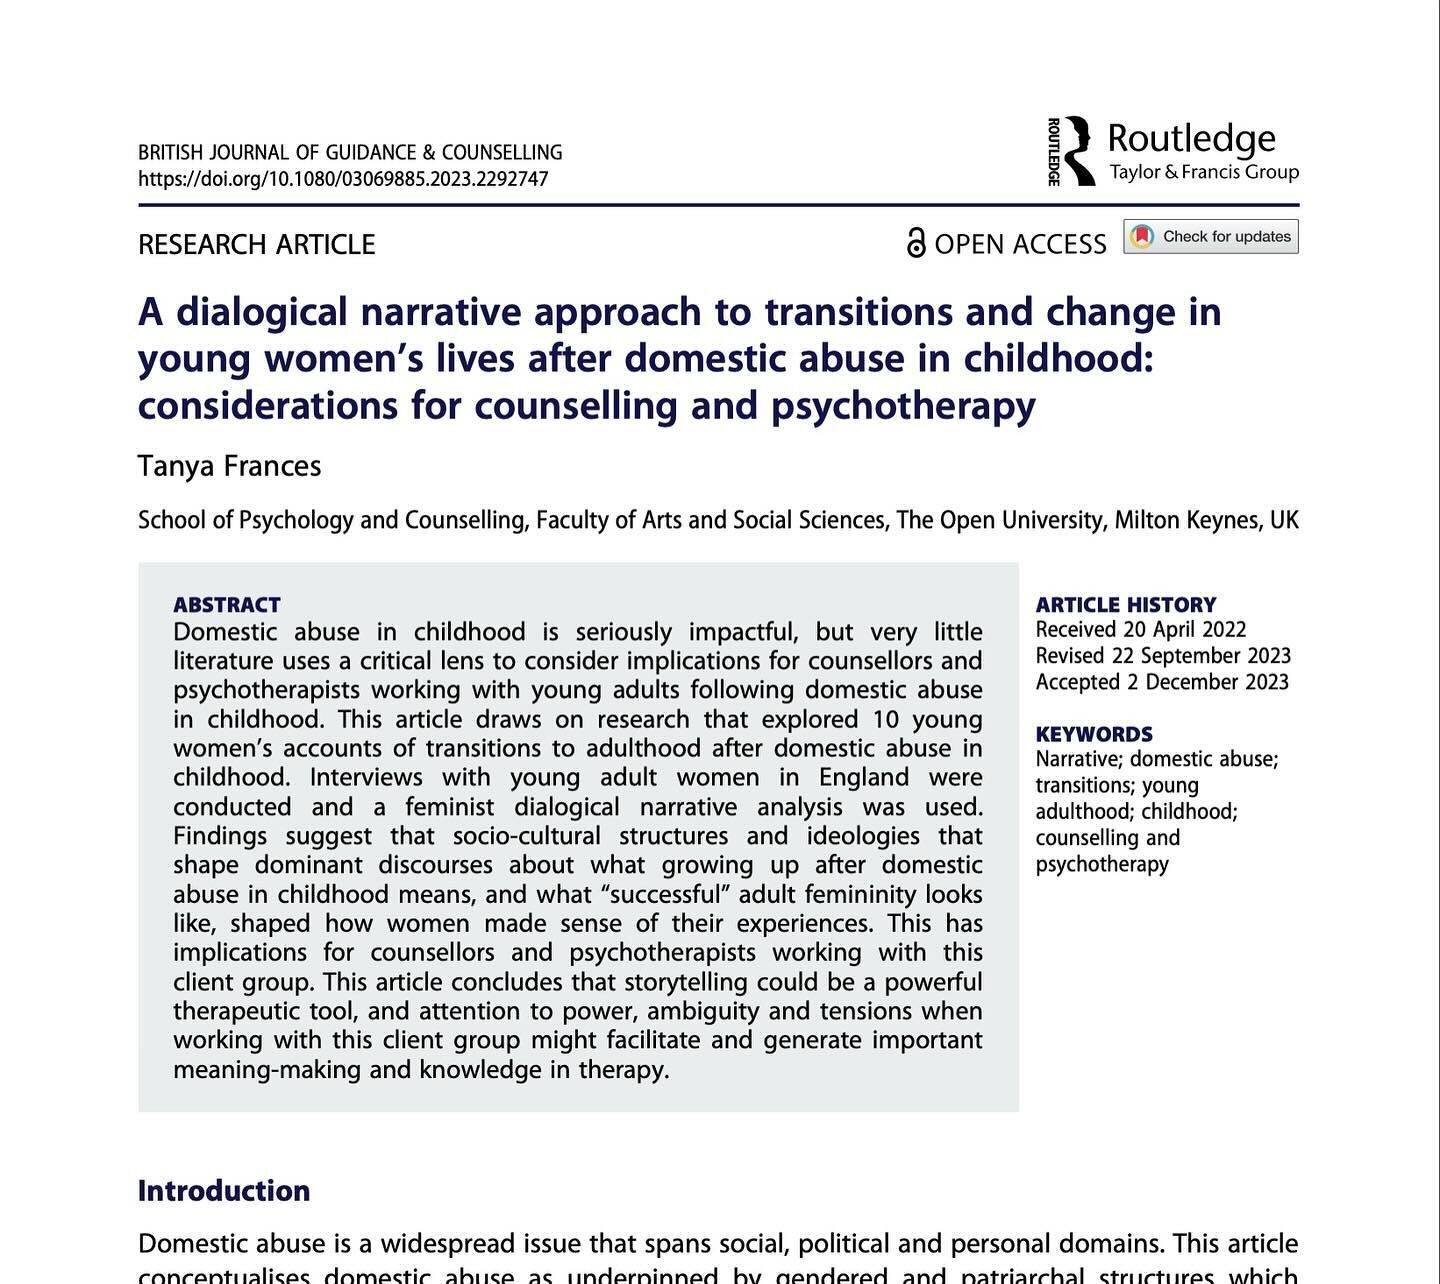 And a new publication to end the month on. Always curious to hear thoughts and have more conversations as I see writing and thinking through these things as a dialogical and evolving process. I originally wrote this paper a couple of years ago and I 